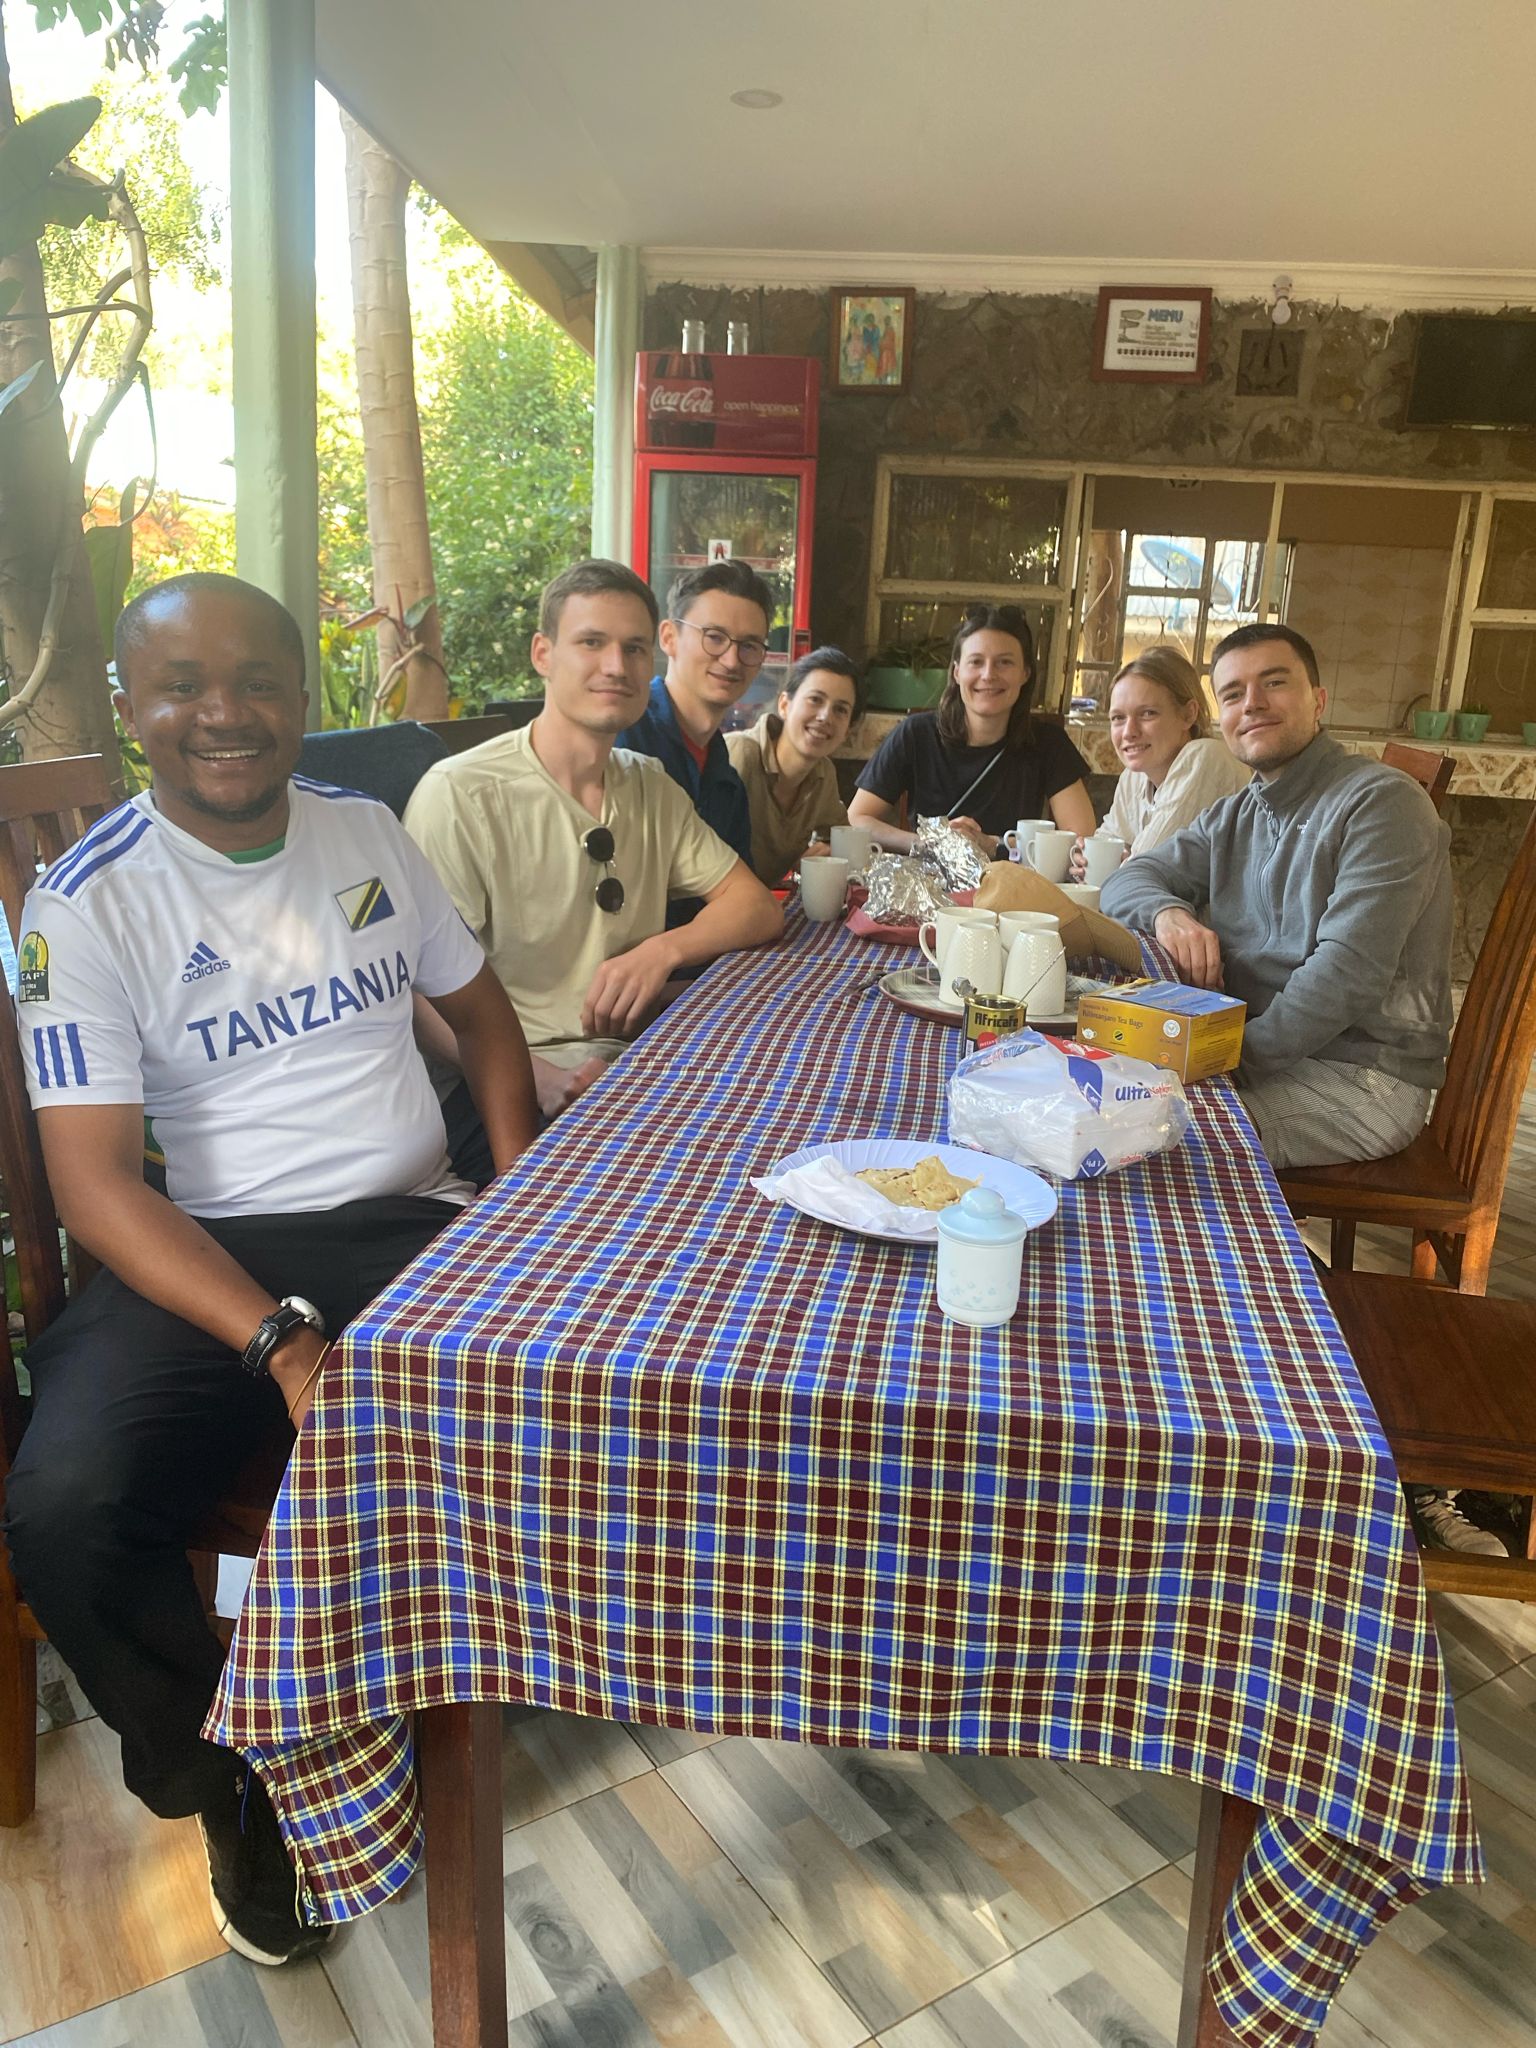 Executive Director of PROCEEDING ADVENTURES LIMITED TOURISM COMPANY IN MOSHI TANZANIA WHEN HE WAS CHILLING DOWN WITH OUR DEAR CUSTOMERS FROM GERMANY AND AUSTRIA WHEN THEY WERE ON THE WAY TO EXPLORE LAKE NATRON AND OLDOINYO LENGAI VOLCANO HIKING